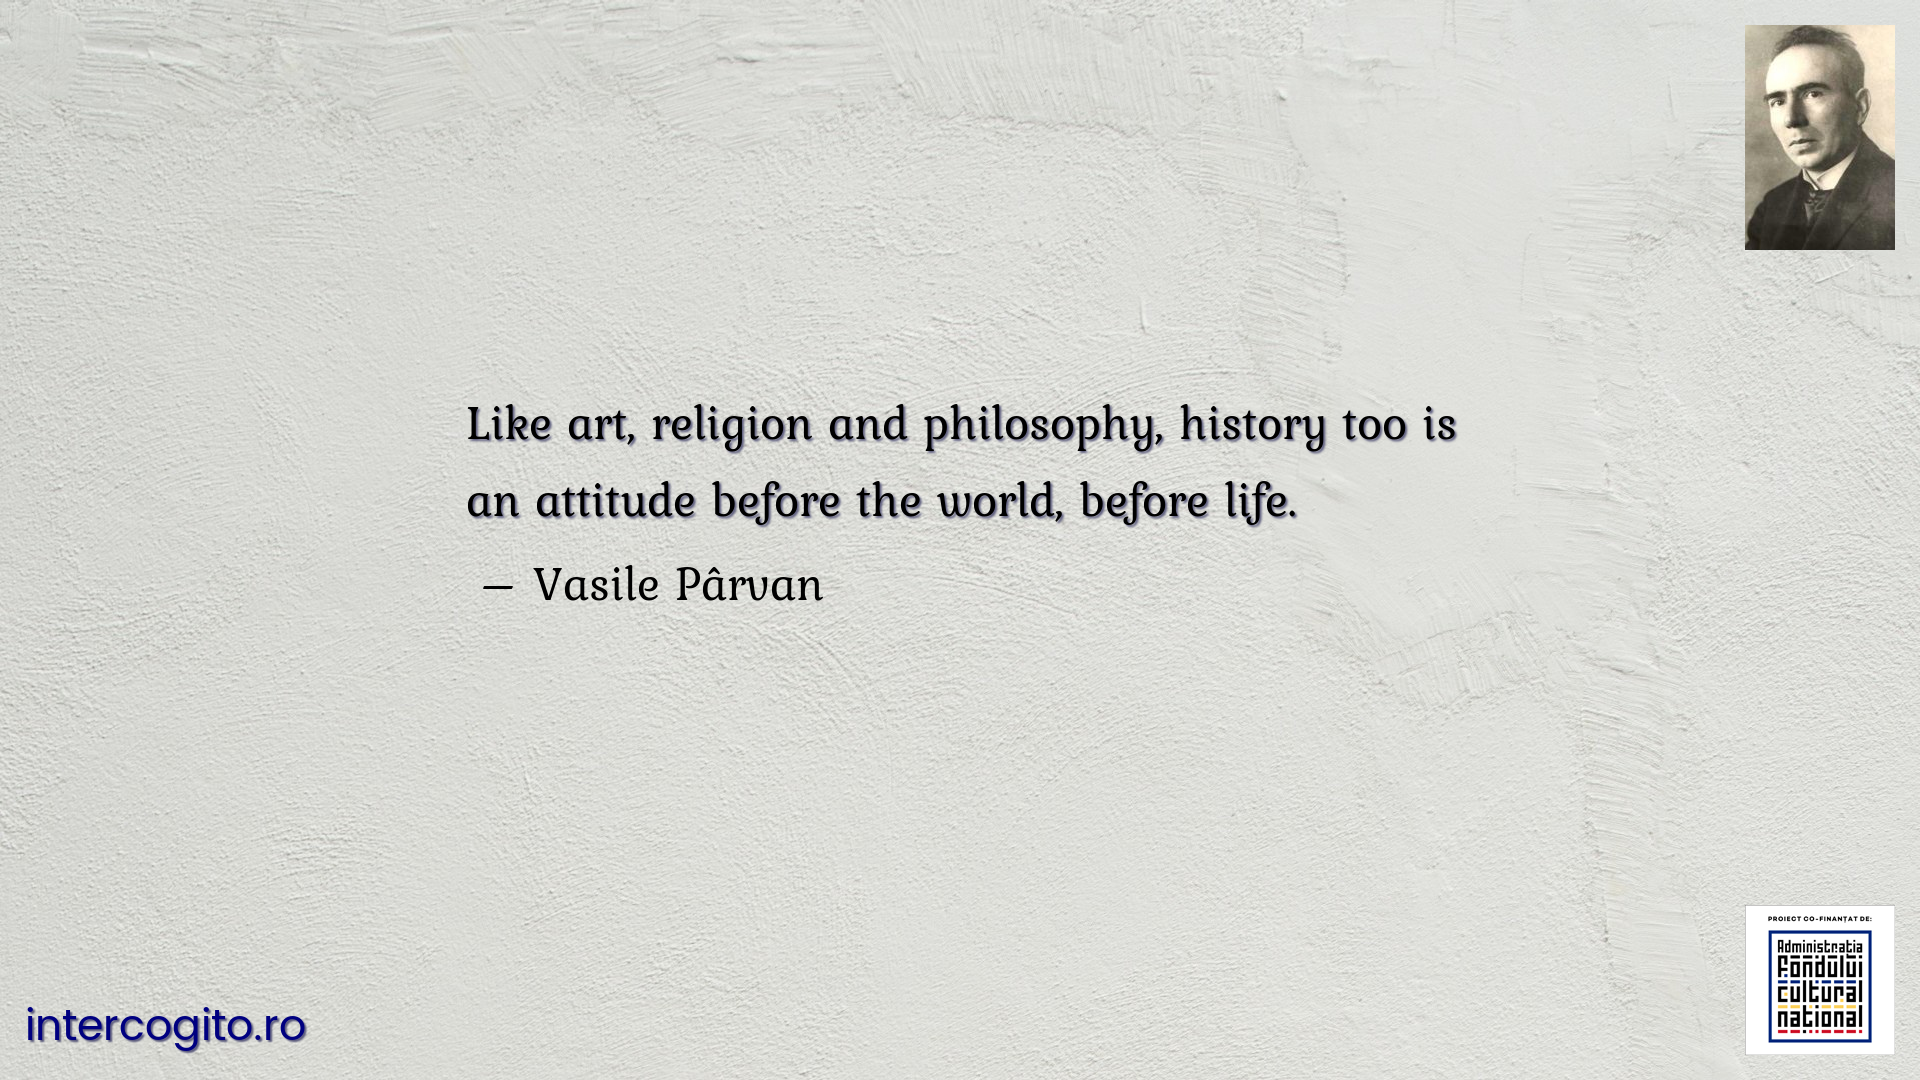 Like art, religion and philosophy, history too is an attitude before the world, before life.